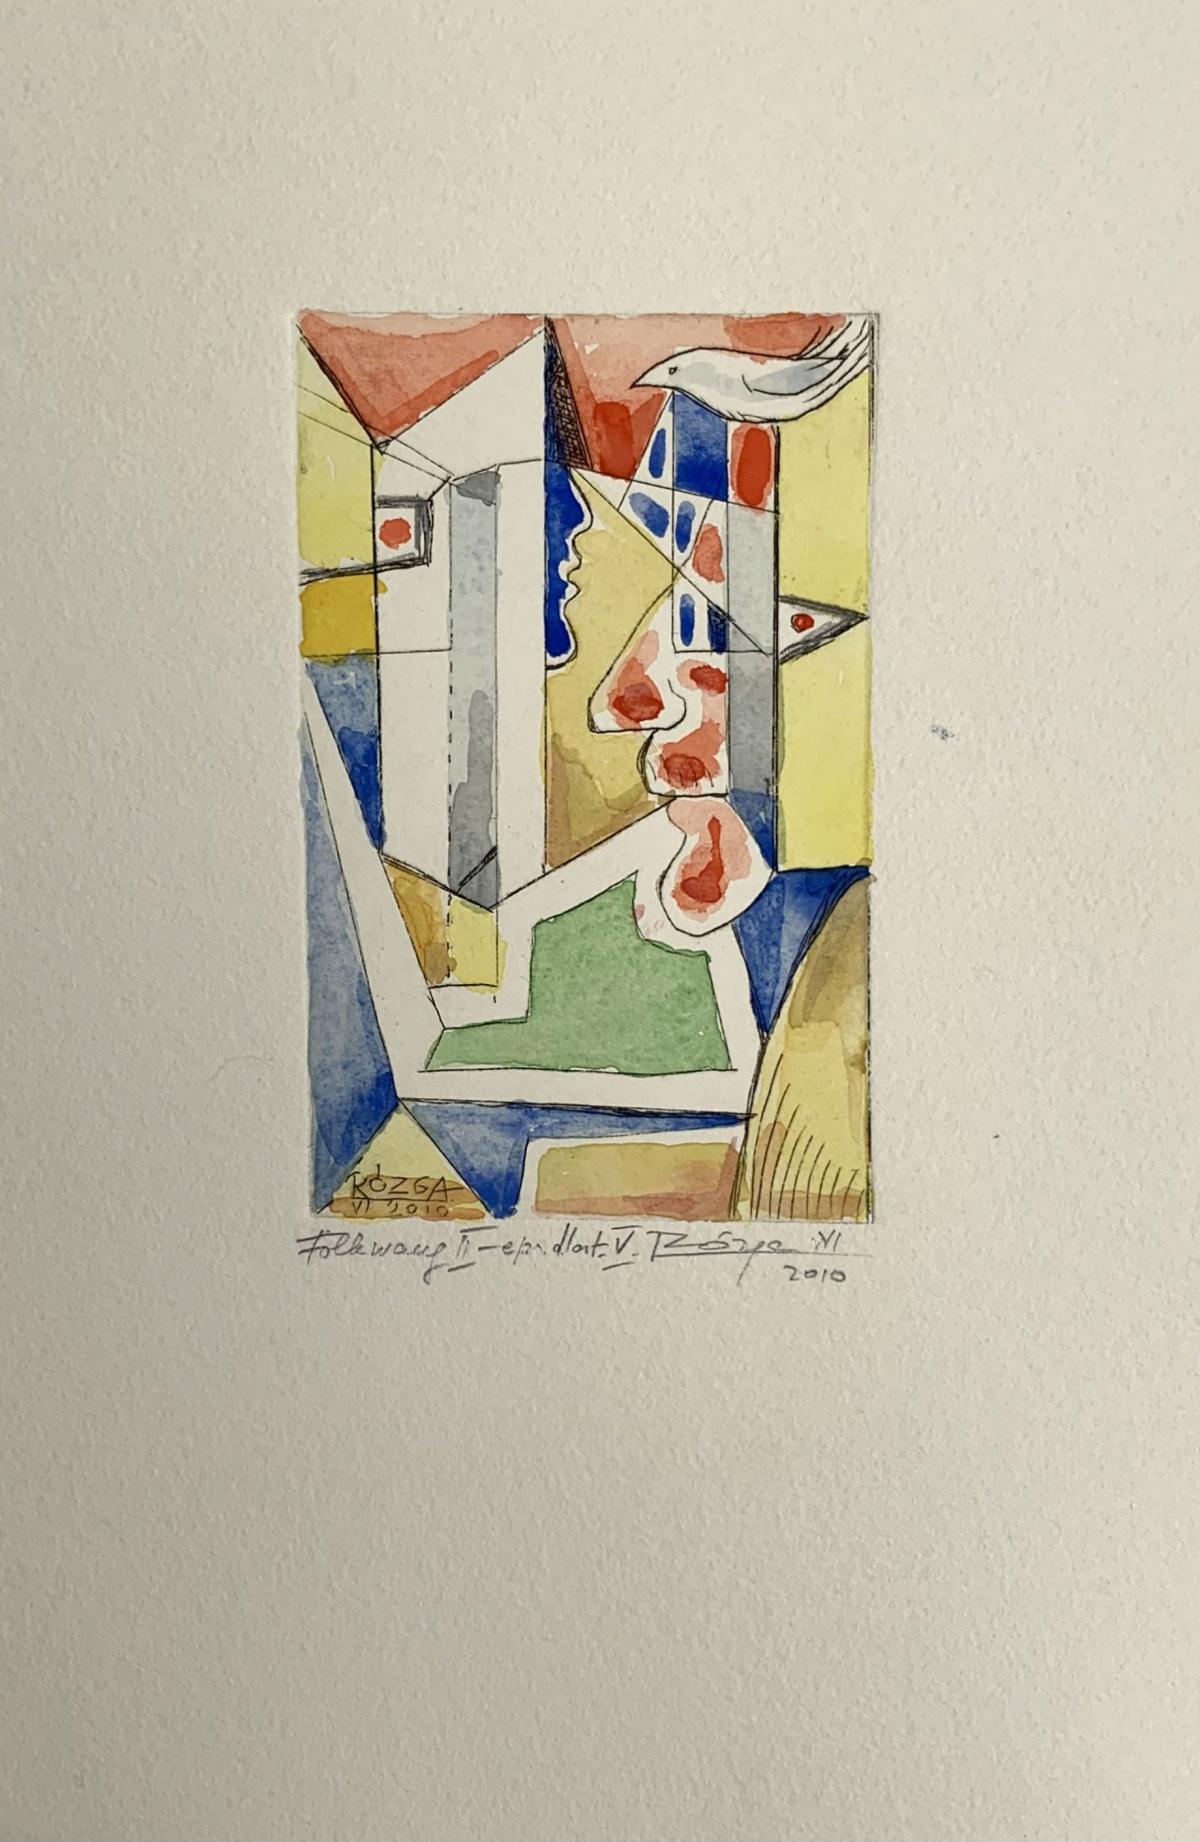 Folkwang -  Abstract drypoint & watercolor, Colorful, Surrealist, Vibrant - Print by Leszek Rózga